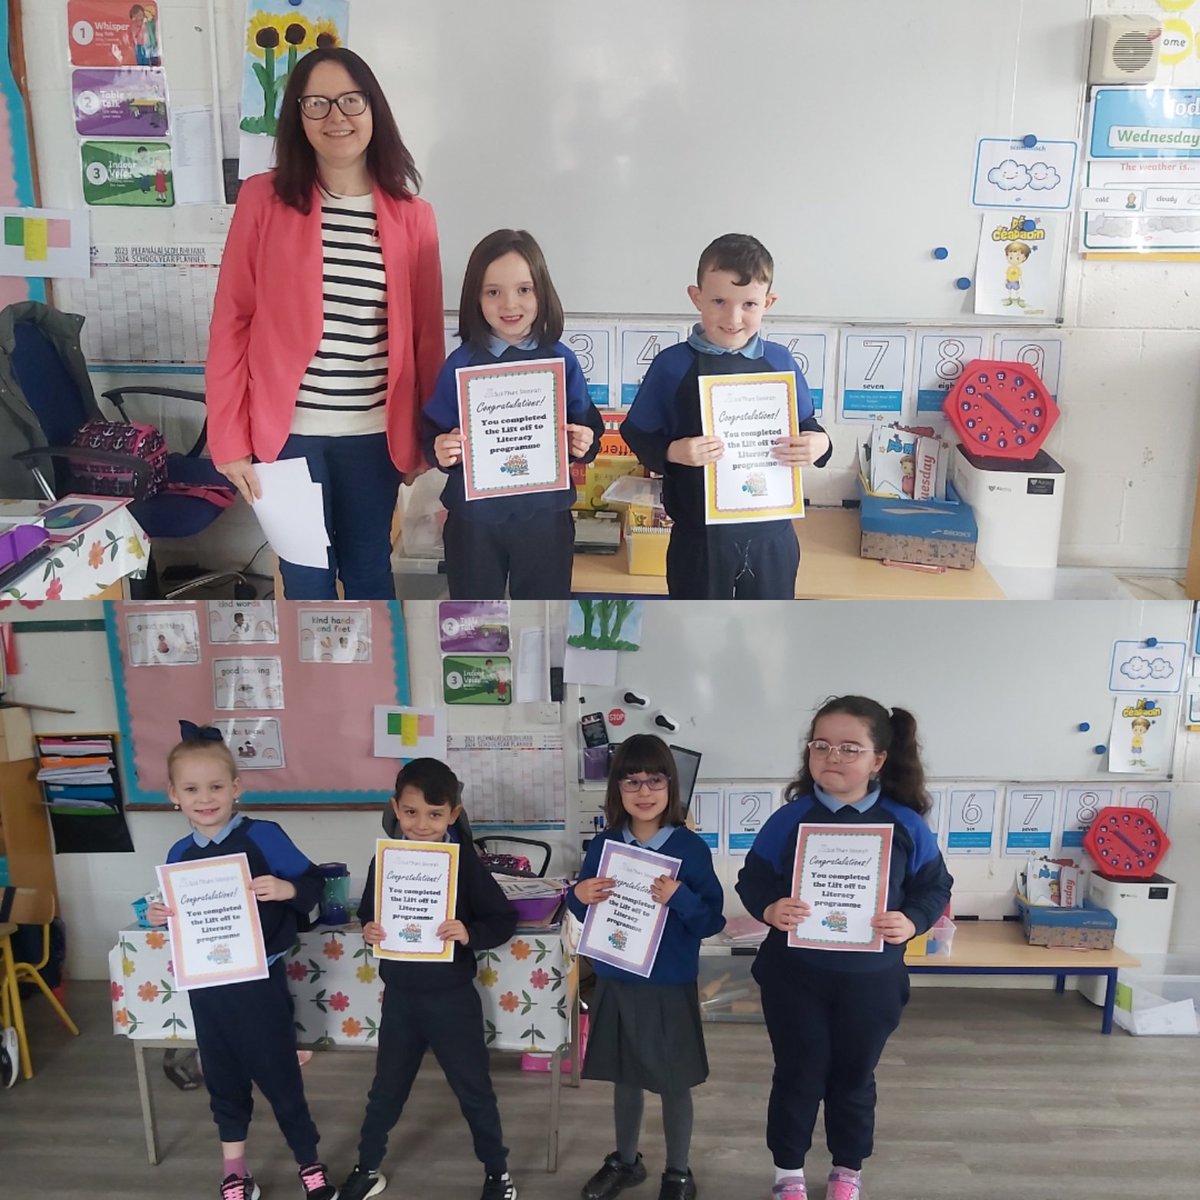 Today we received our certificates for completing the Lift Off to Literacy programme. Congratulations to all of the children in Room 11! 🤗